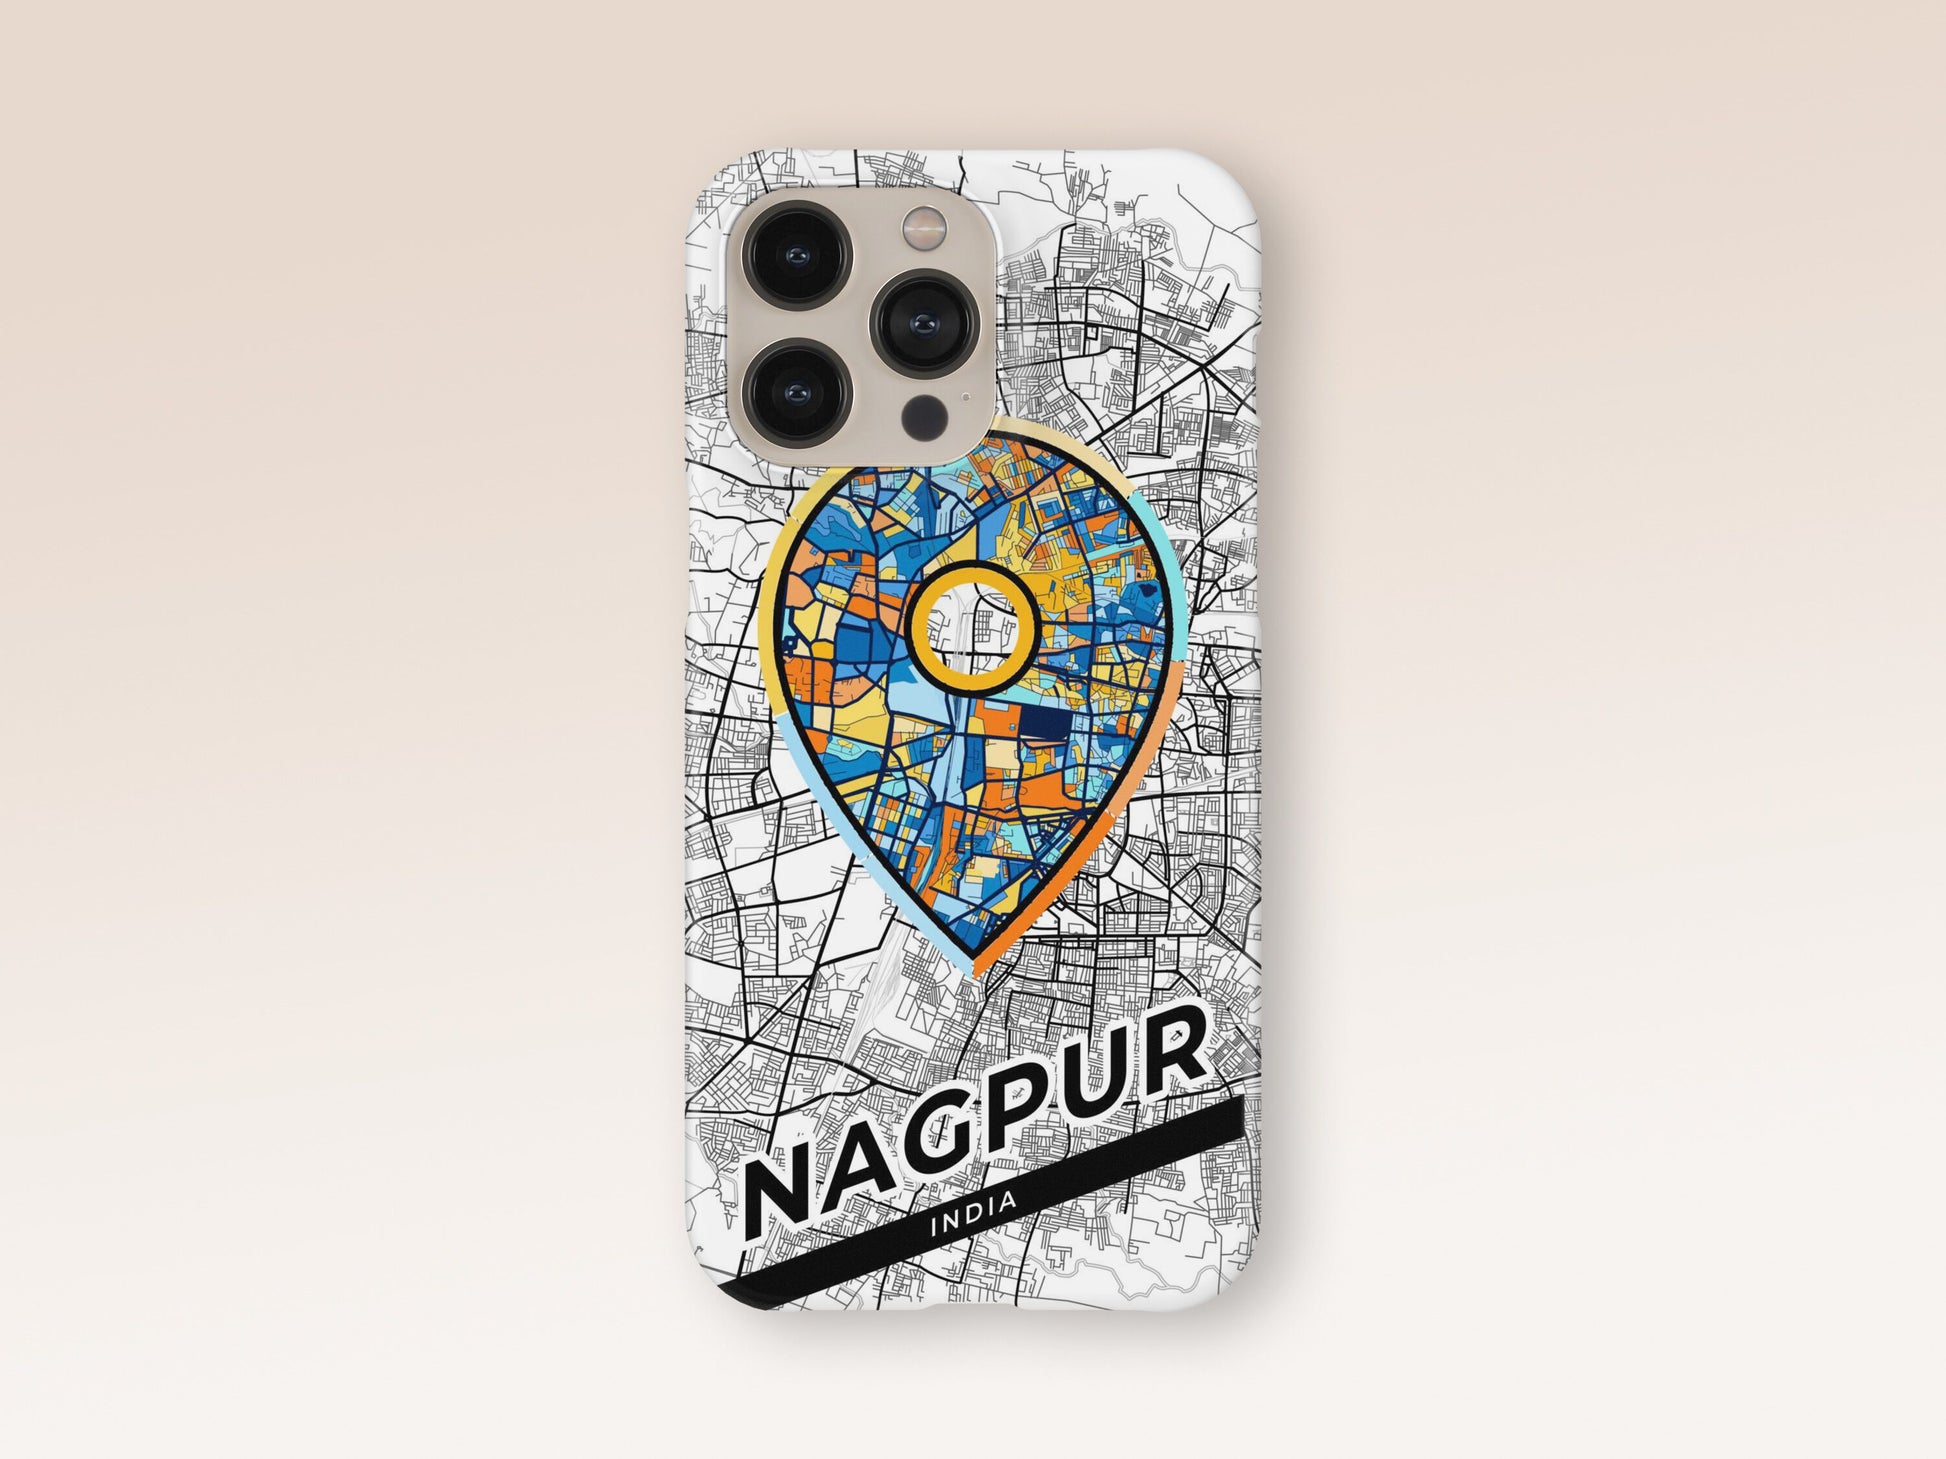 Nagpur India slim phone case with colorful icon 1